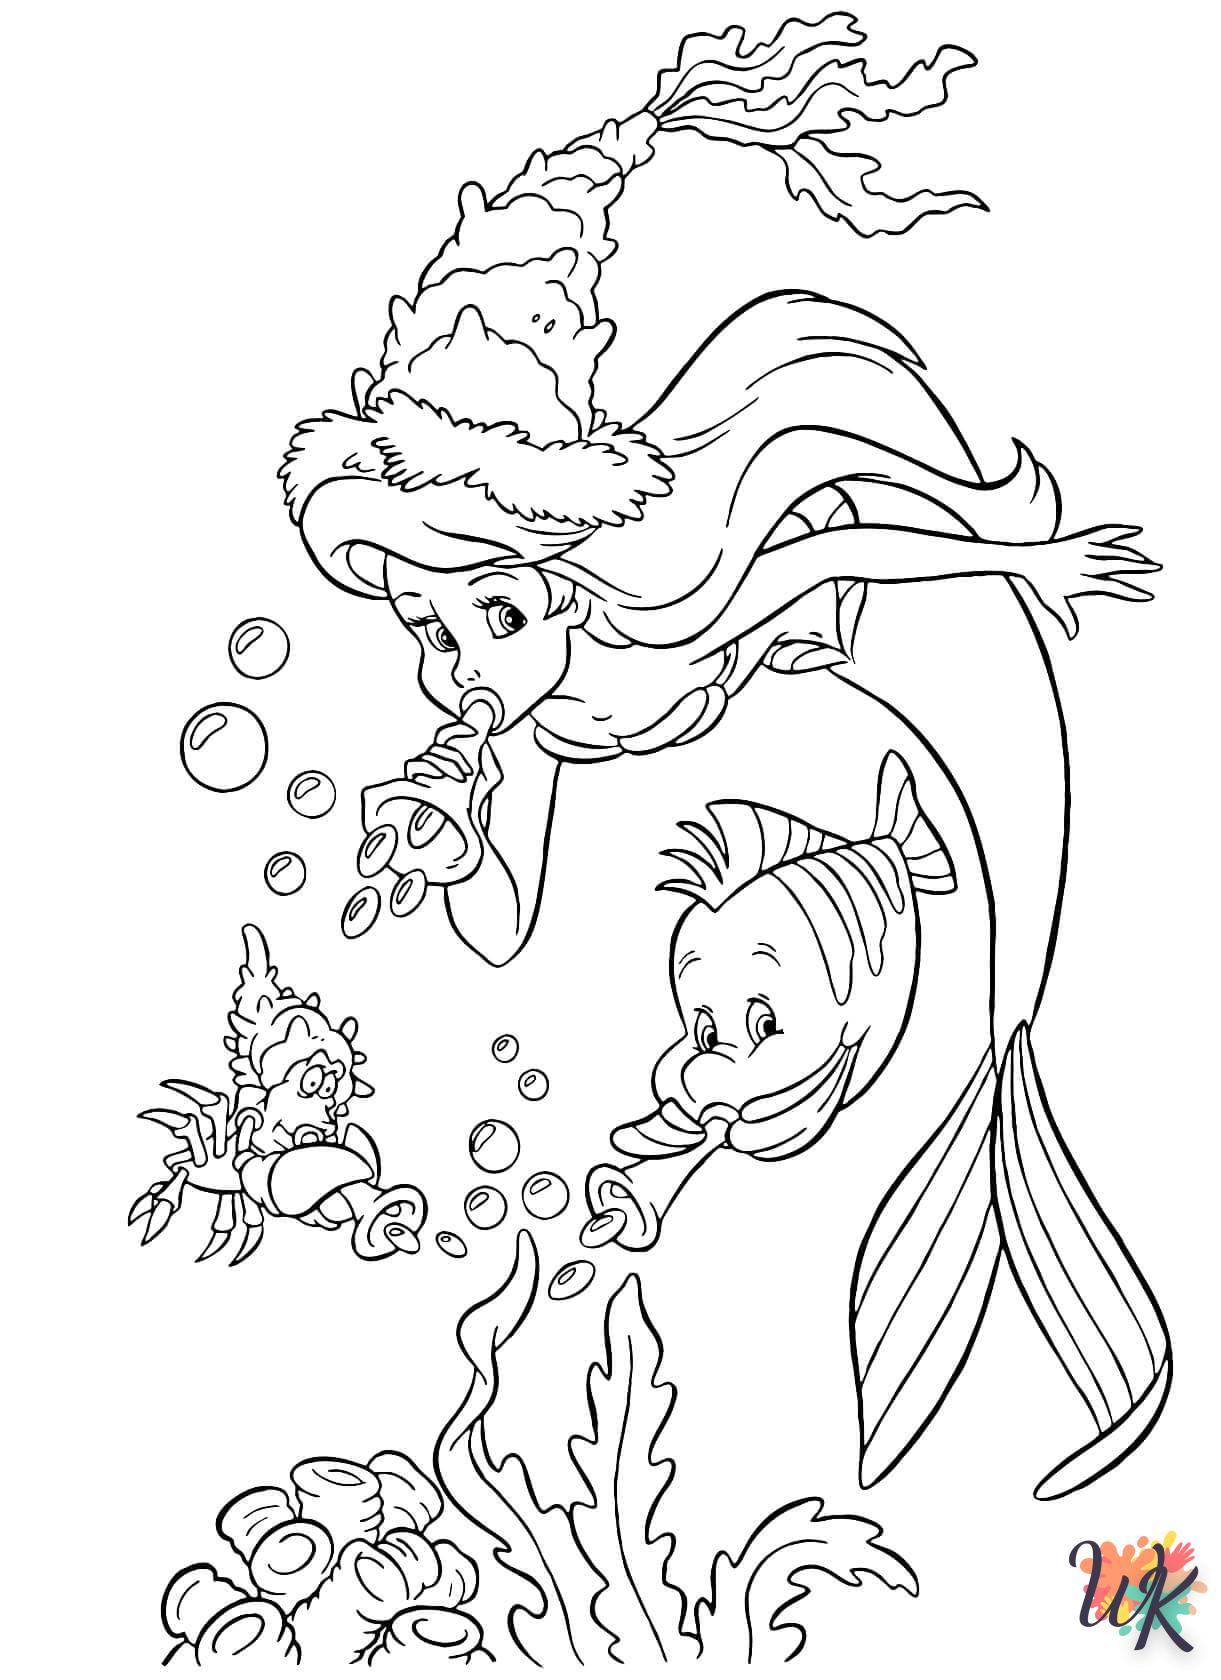 Disney coloring for children aged 5 to print 3